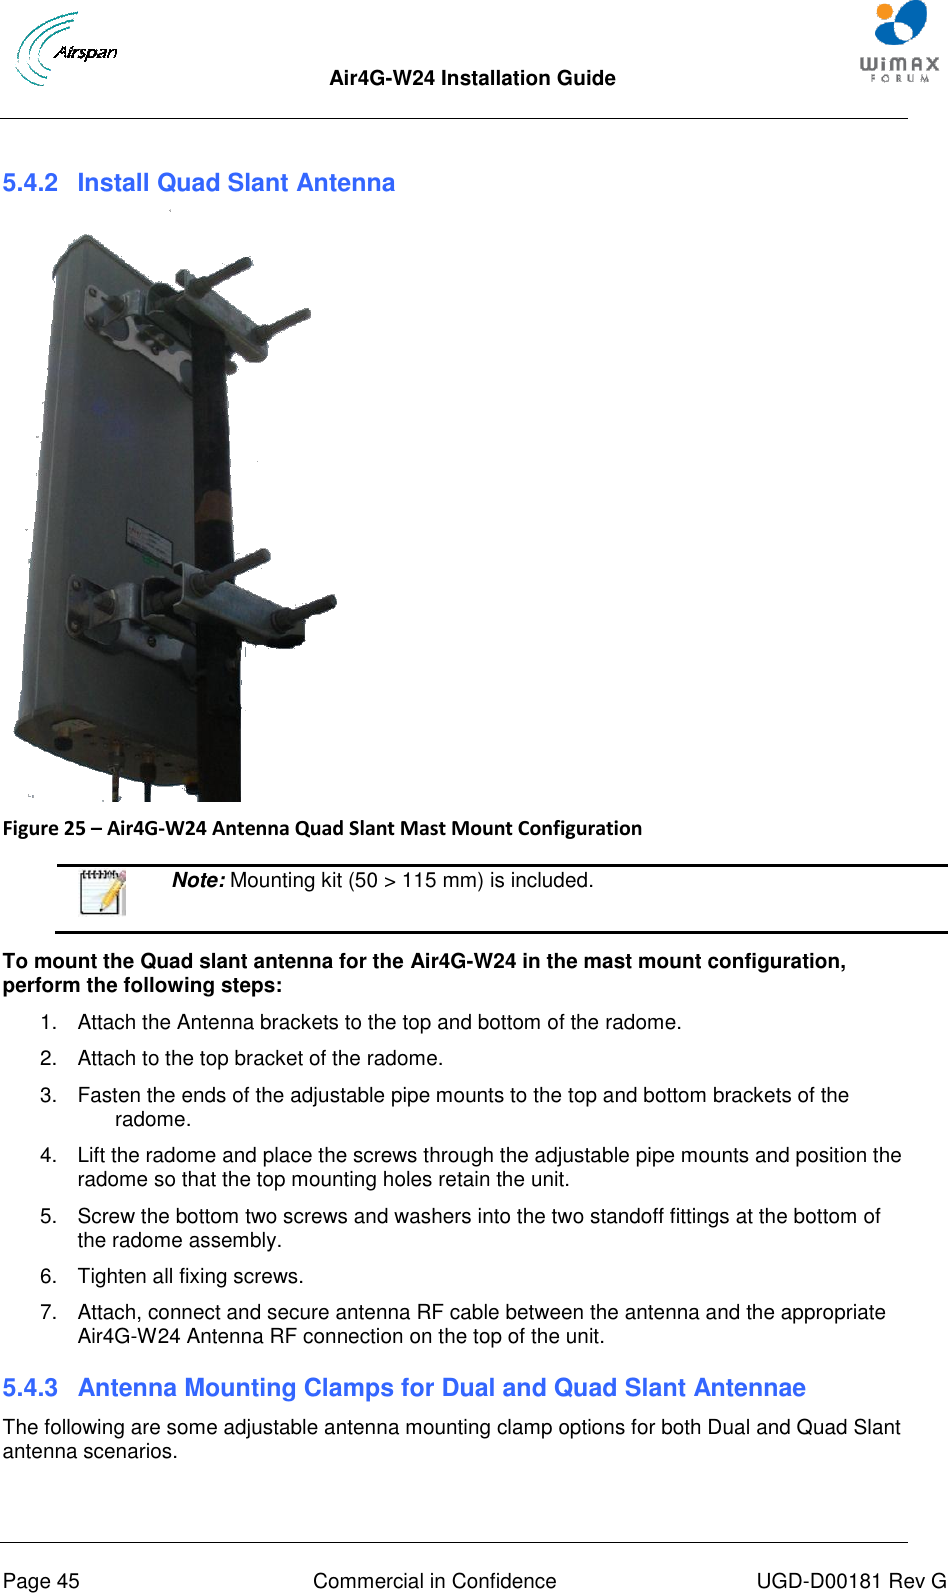  Air4G-W24 Installation Guide       Page 45  Commercial in Confidence  UGD-D00181 Rev G  5.4.2  Install Quad Slant Antenna    Figure 25 – Air4G-W24 Antenna Quad Slant Mast Mount Configuration    Note: Mounting kit (50 &gt; 115 mm) is included.  To mount the Quad slant antenna for the Air4G-W24 in the mast mount configuration, perform the following steps: 1.  Attach the Antenna brackets to the top and bottom of the radome.  2.  Attach to the top bracket of the radome. 3.  Fasten the ends of the adjustable pipe mounts to the top and bottom brackets of the radome. 4.  Lift the radome and place the screws through the adjustable pipe mounts and position the radome so that the top mounting holes retain the unit. 5.  Screw the bottom two screws and washers into the two standoff fittings at the bottom of the radome assembly. 6.  Tighten all fixing screws. 7.  Attach, connect and secure antenna RF cable between the antenna and the appropriate Air4G-W24 Antenna RF connection on the top of the unit. 5.4.3  Antenna Mounting Clamps for Dual and Quad Slant Antennae The following are some adjustable antenna mounting clamp options for both Dual and Quad Slant antenna scenarios.  